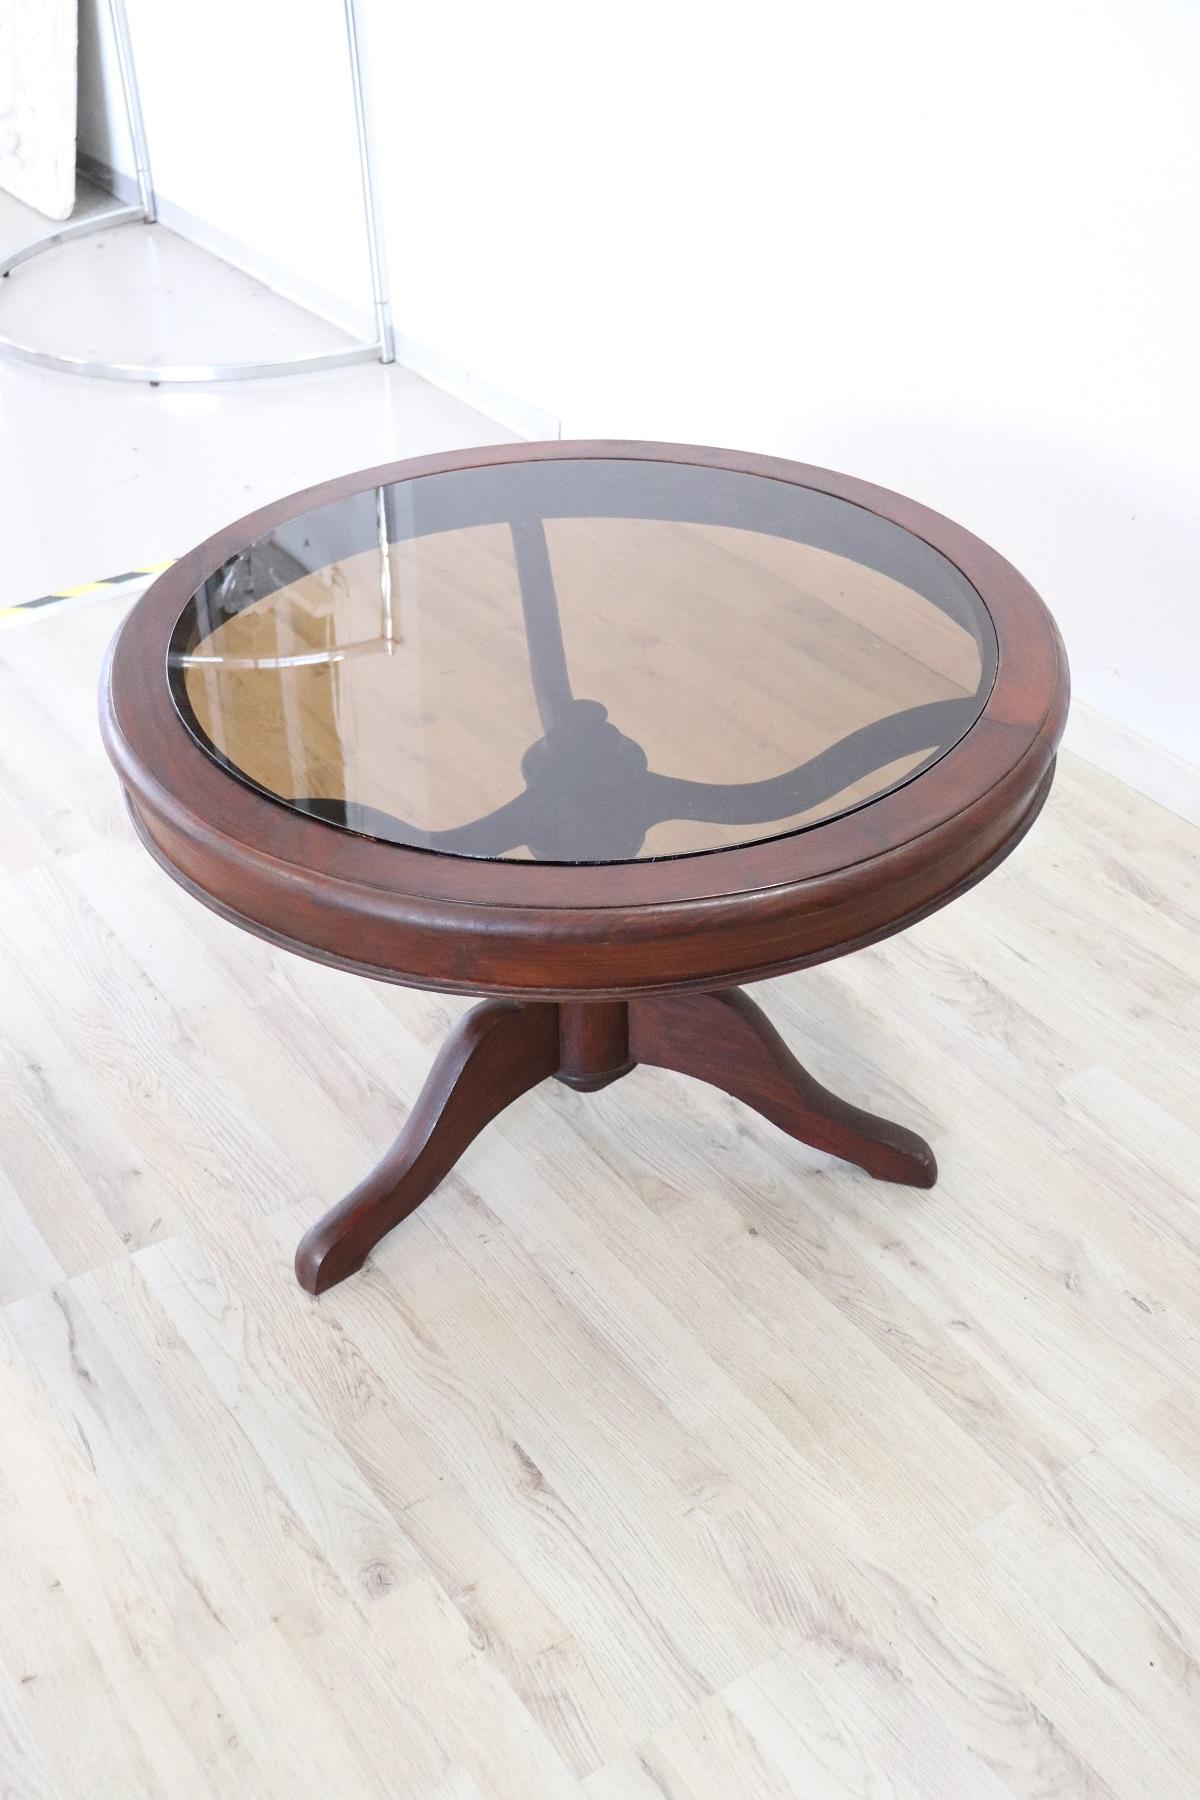 Rare and fine quality Italian 1880s round sofa table or coffee table. The table in precious mahogany wood with finely turned central pedestal. The top is in glass. Perfect condition ready to be placed in your beautiful home.